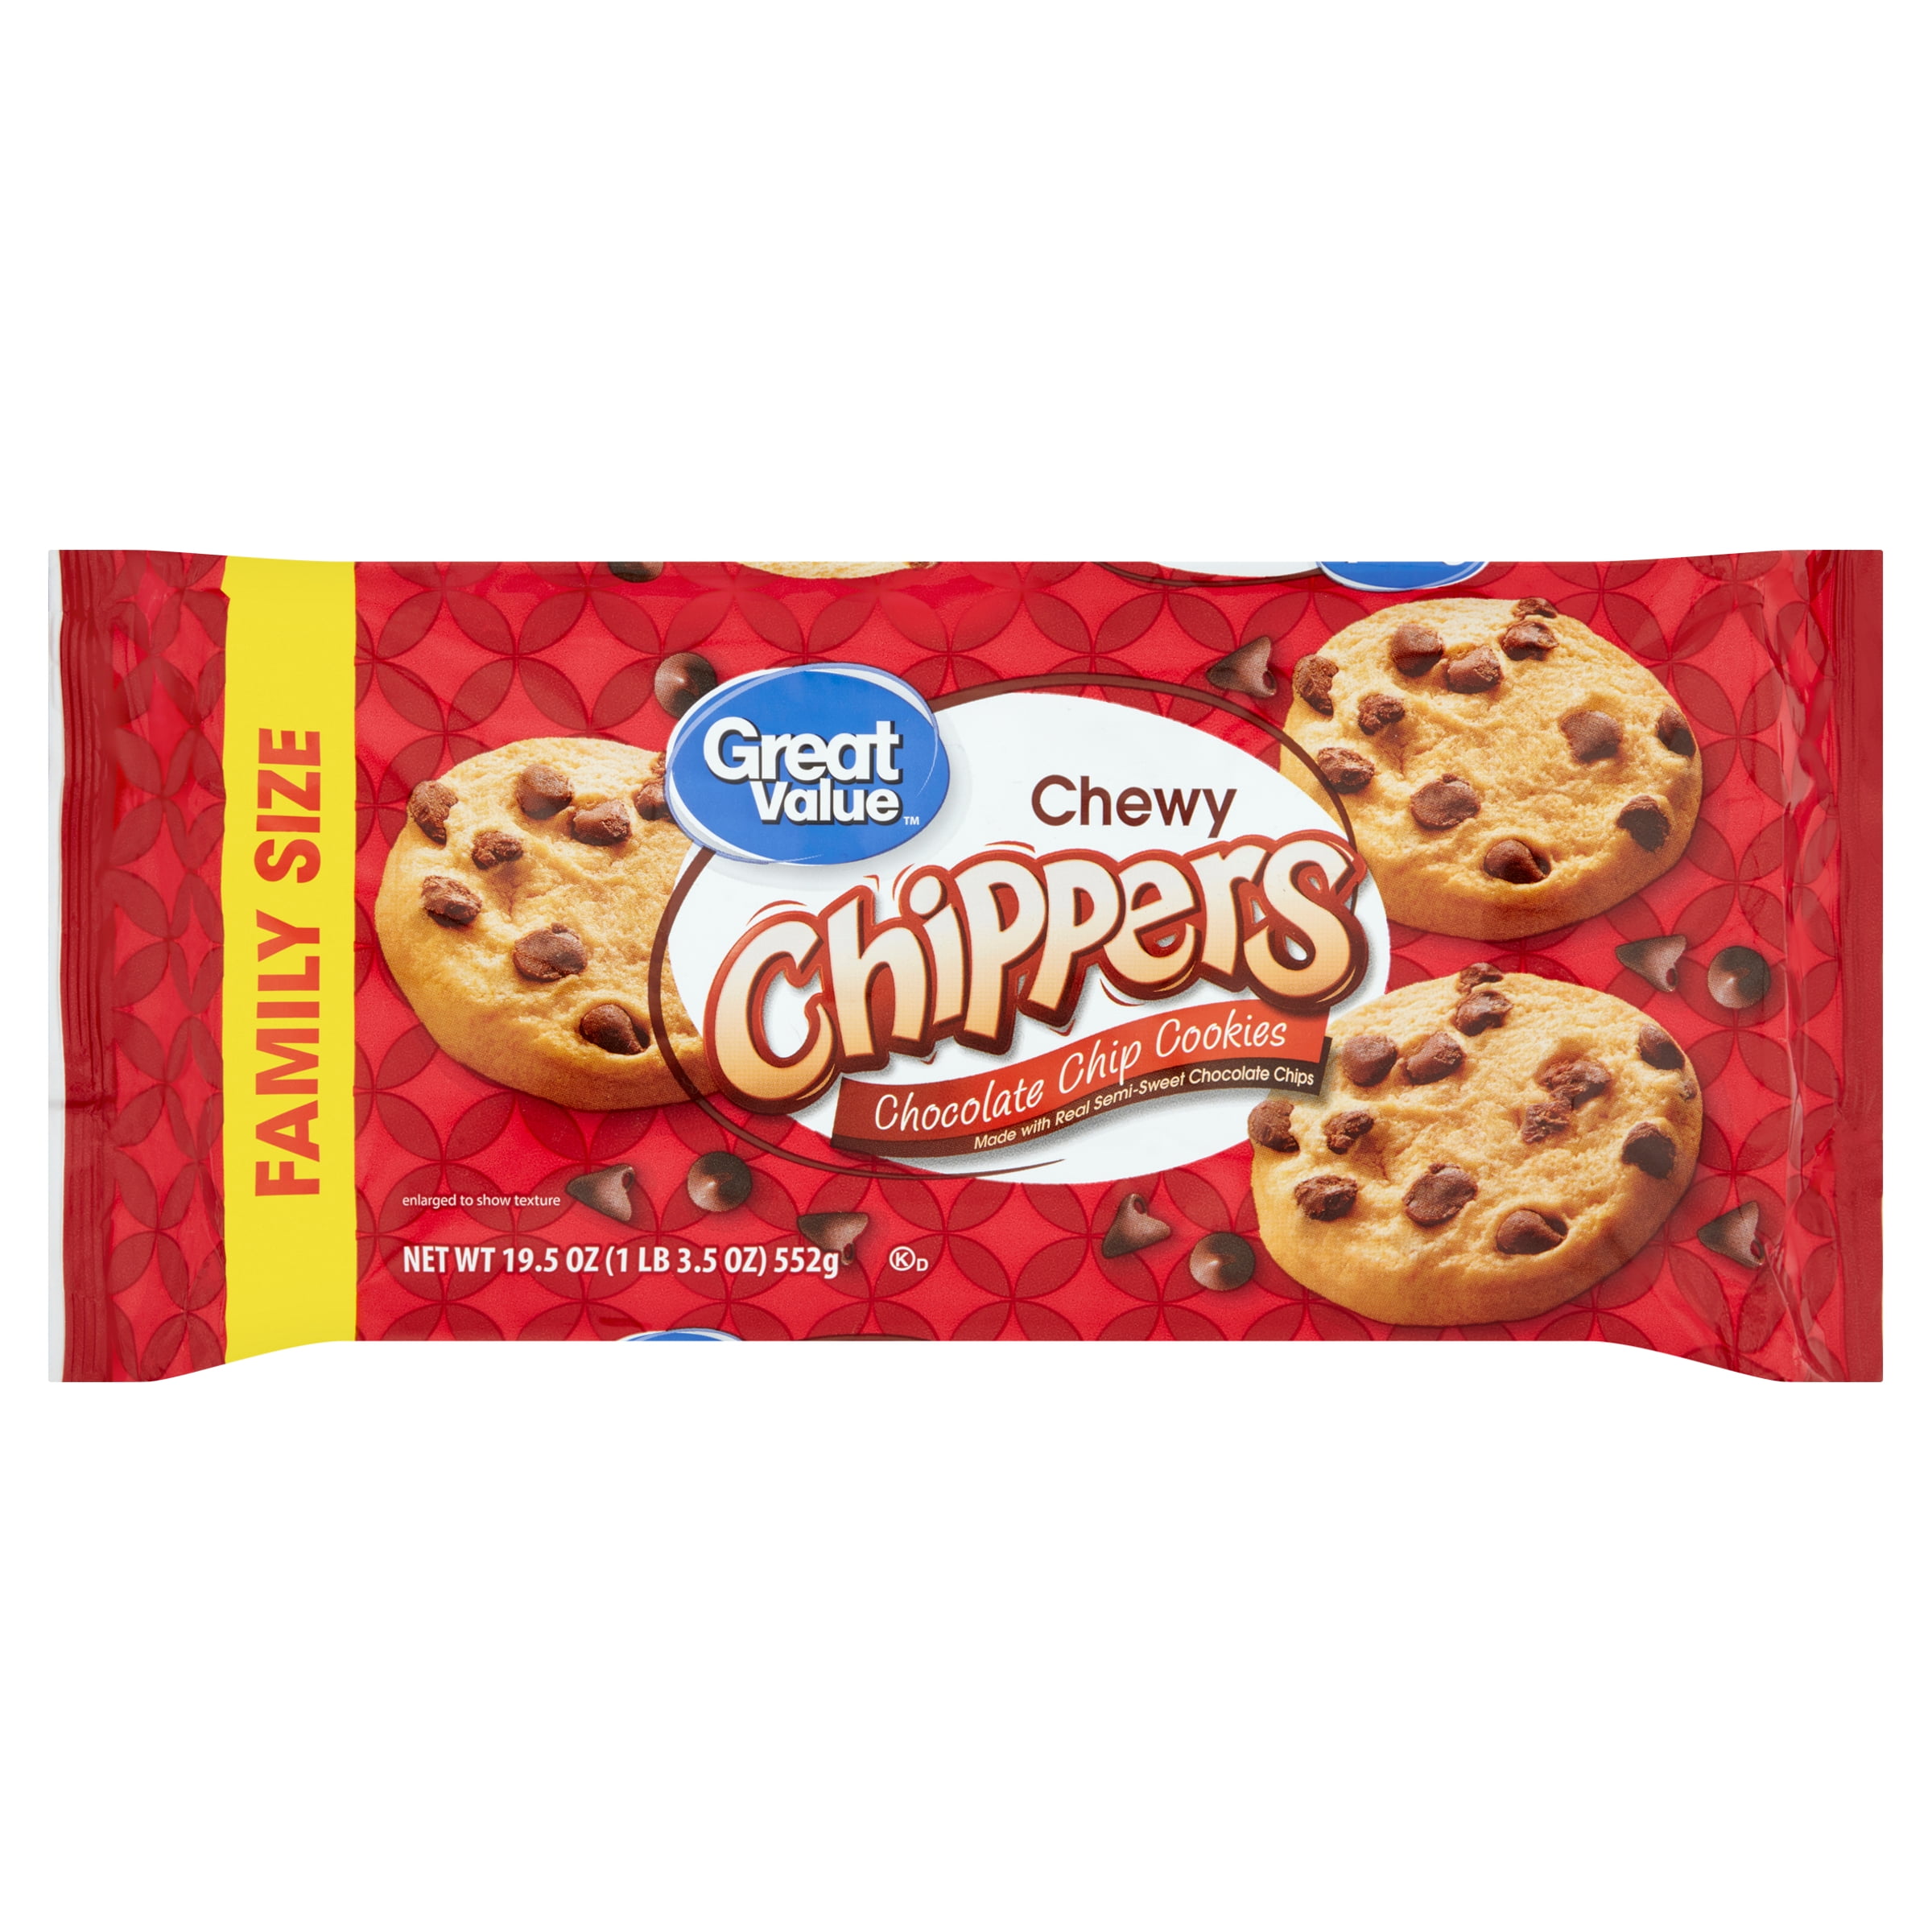 Chocolate Chip made with Chips